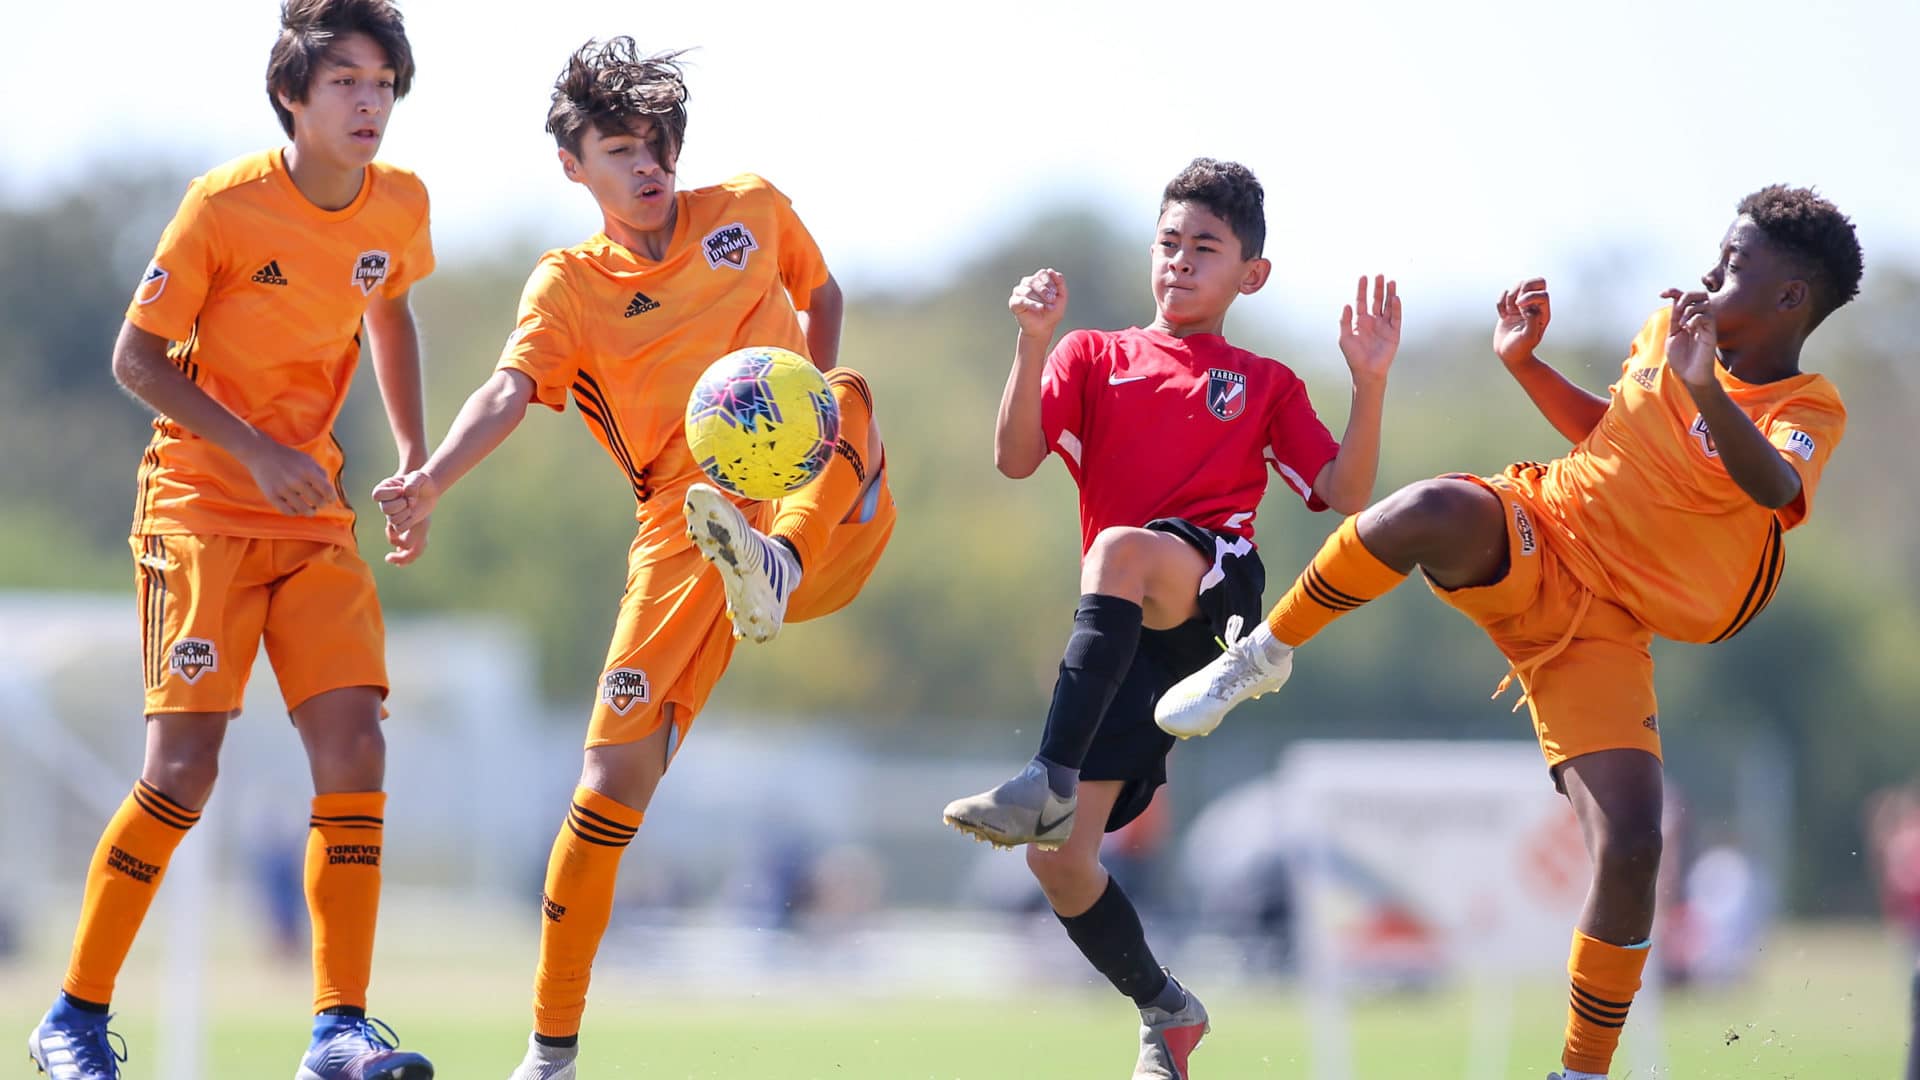 Houston Dynamo FC Tryouts & Club Guide History, Stadium, Players, and